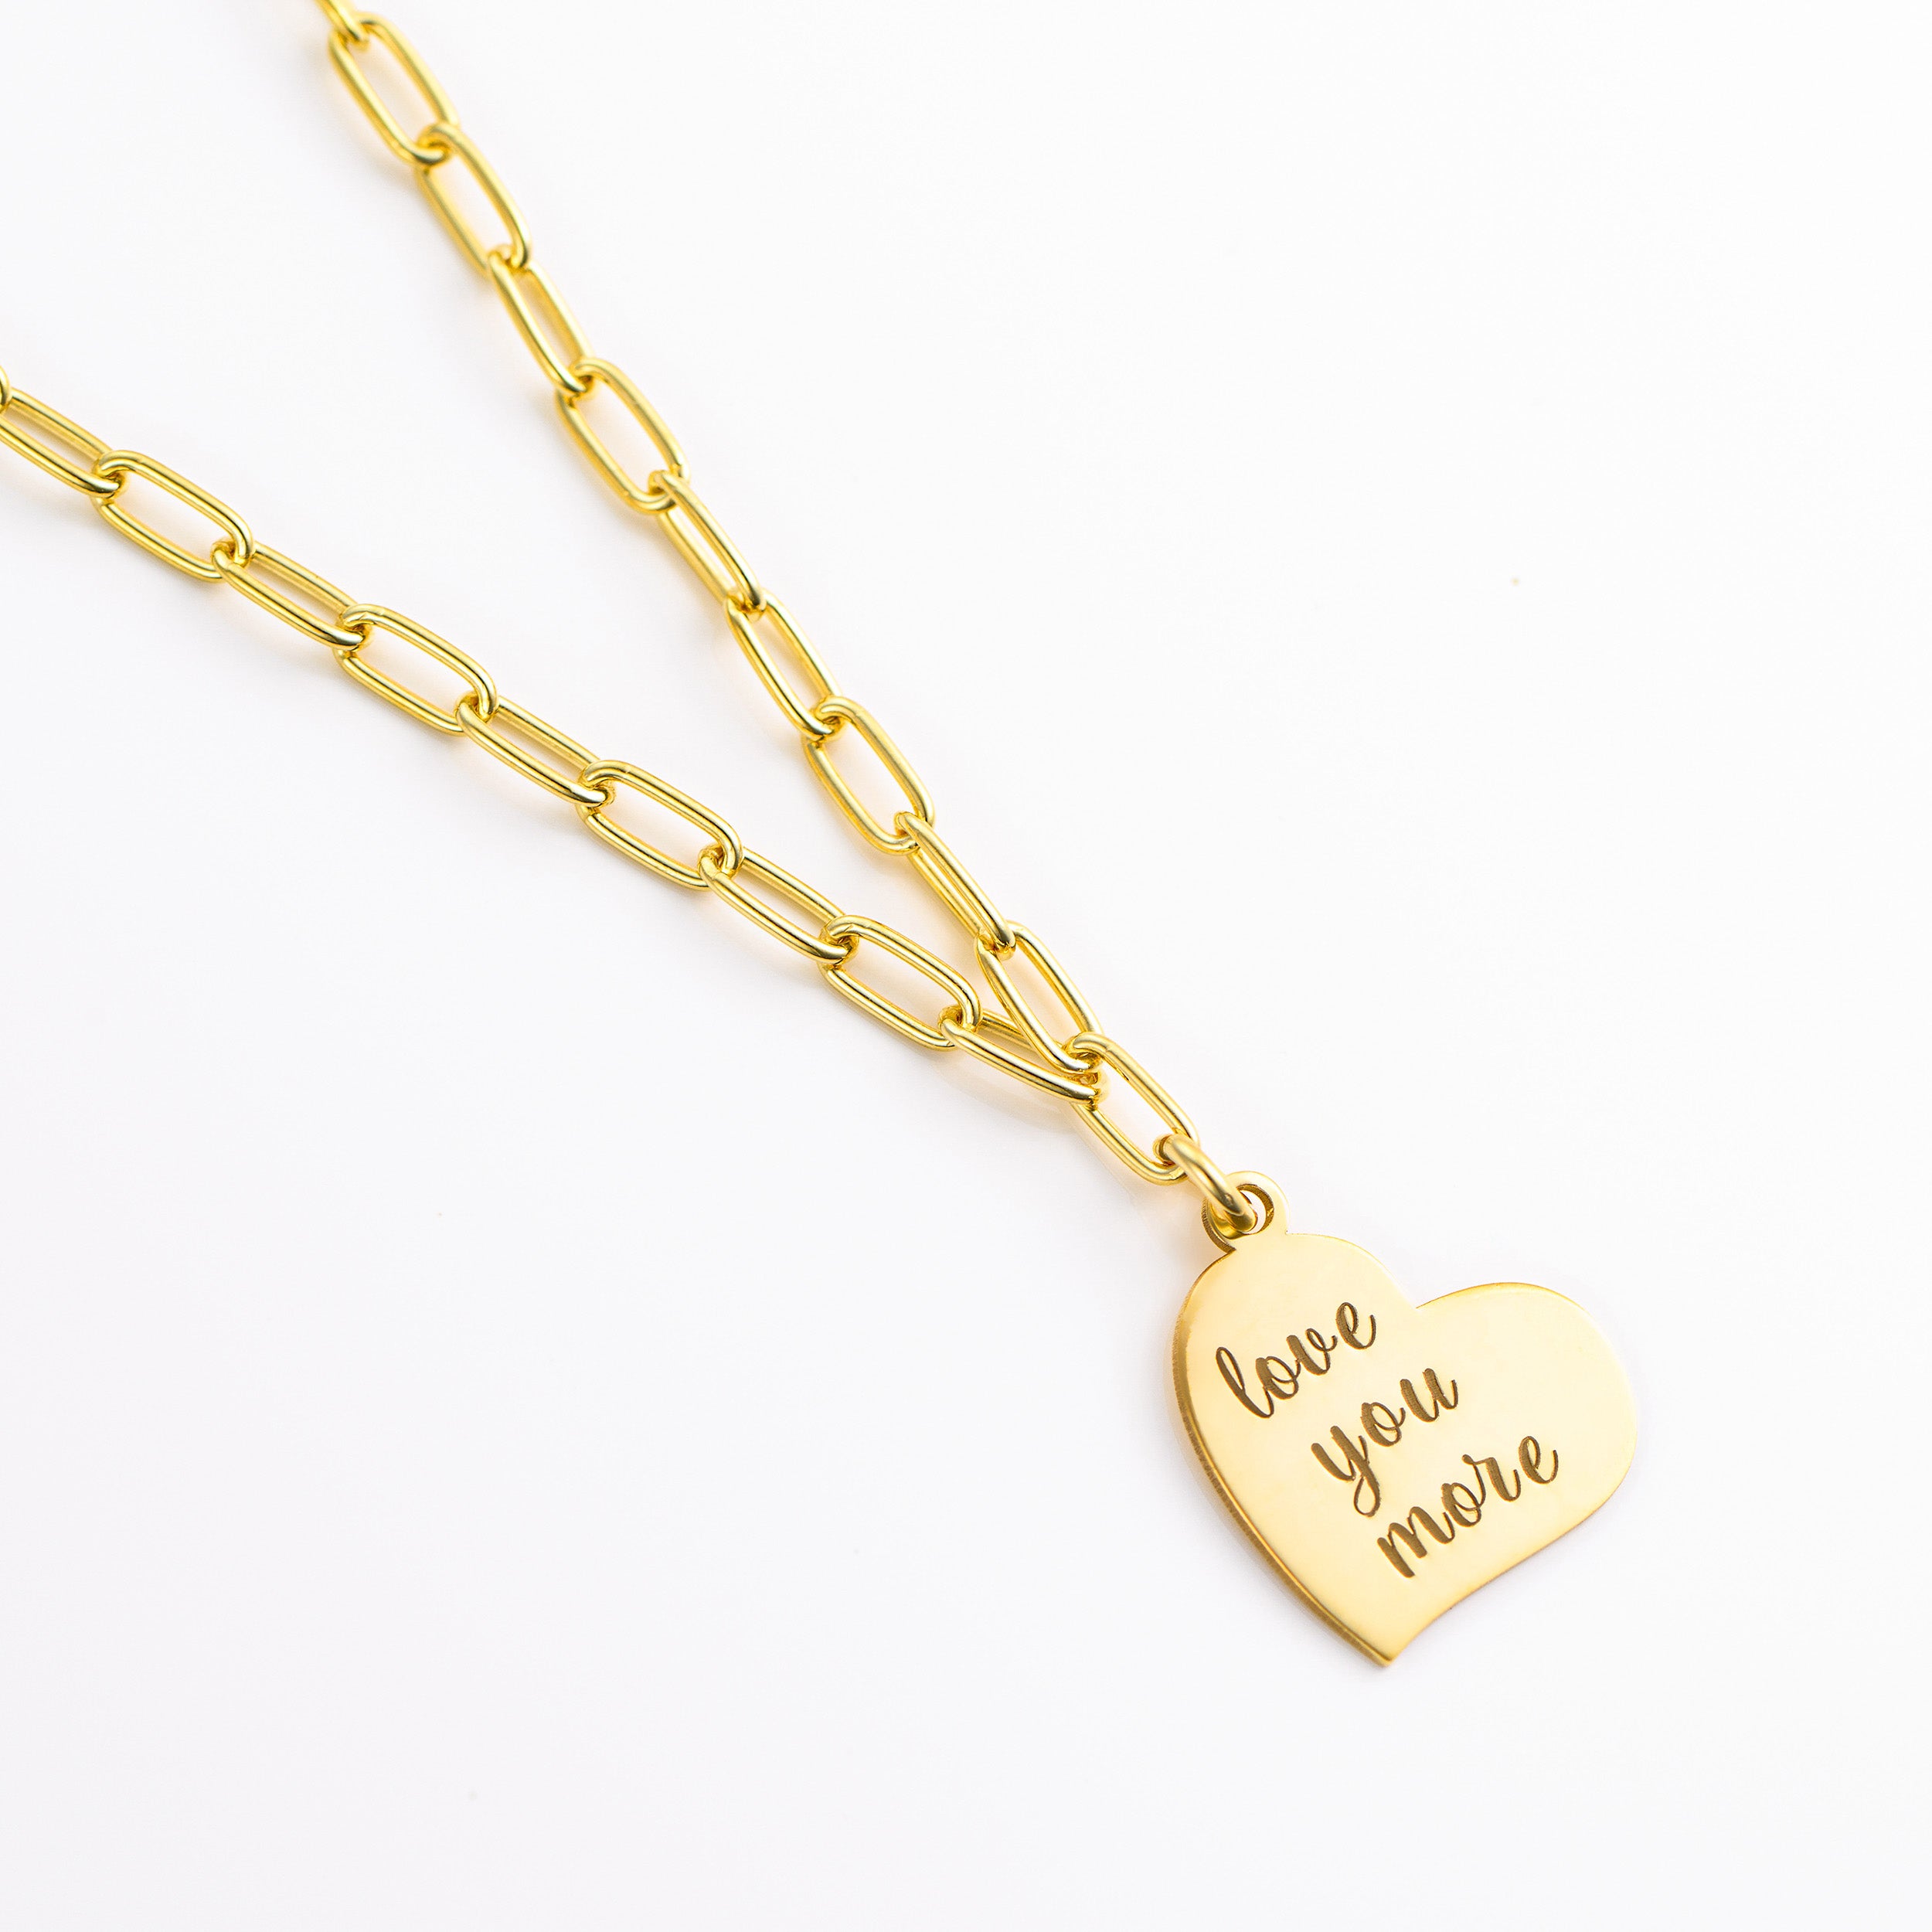 Love you more chain, gold plated silver